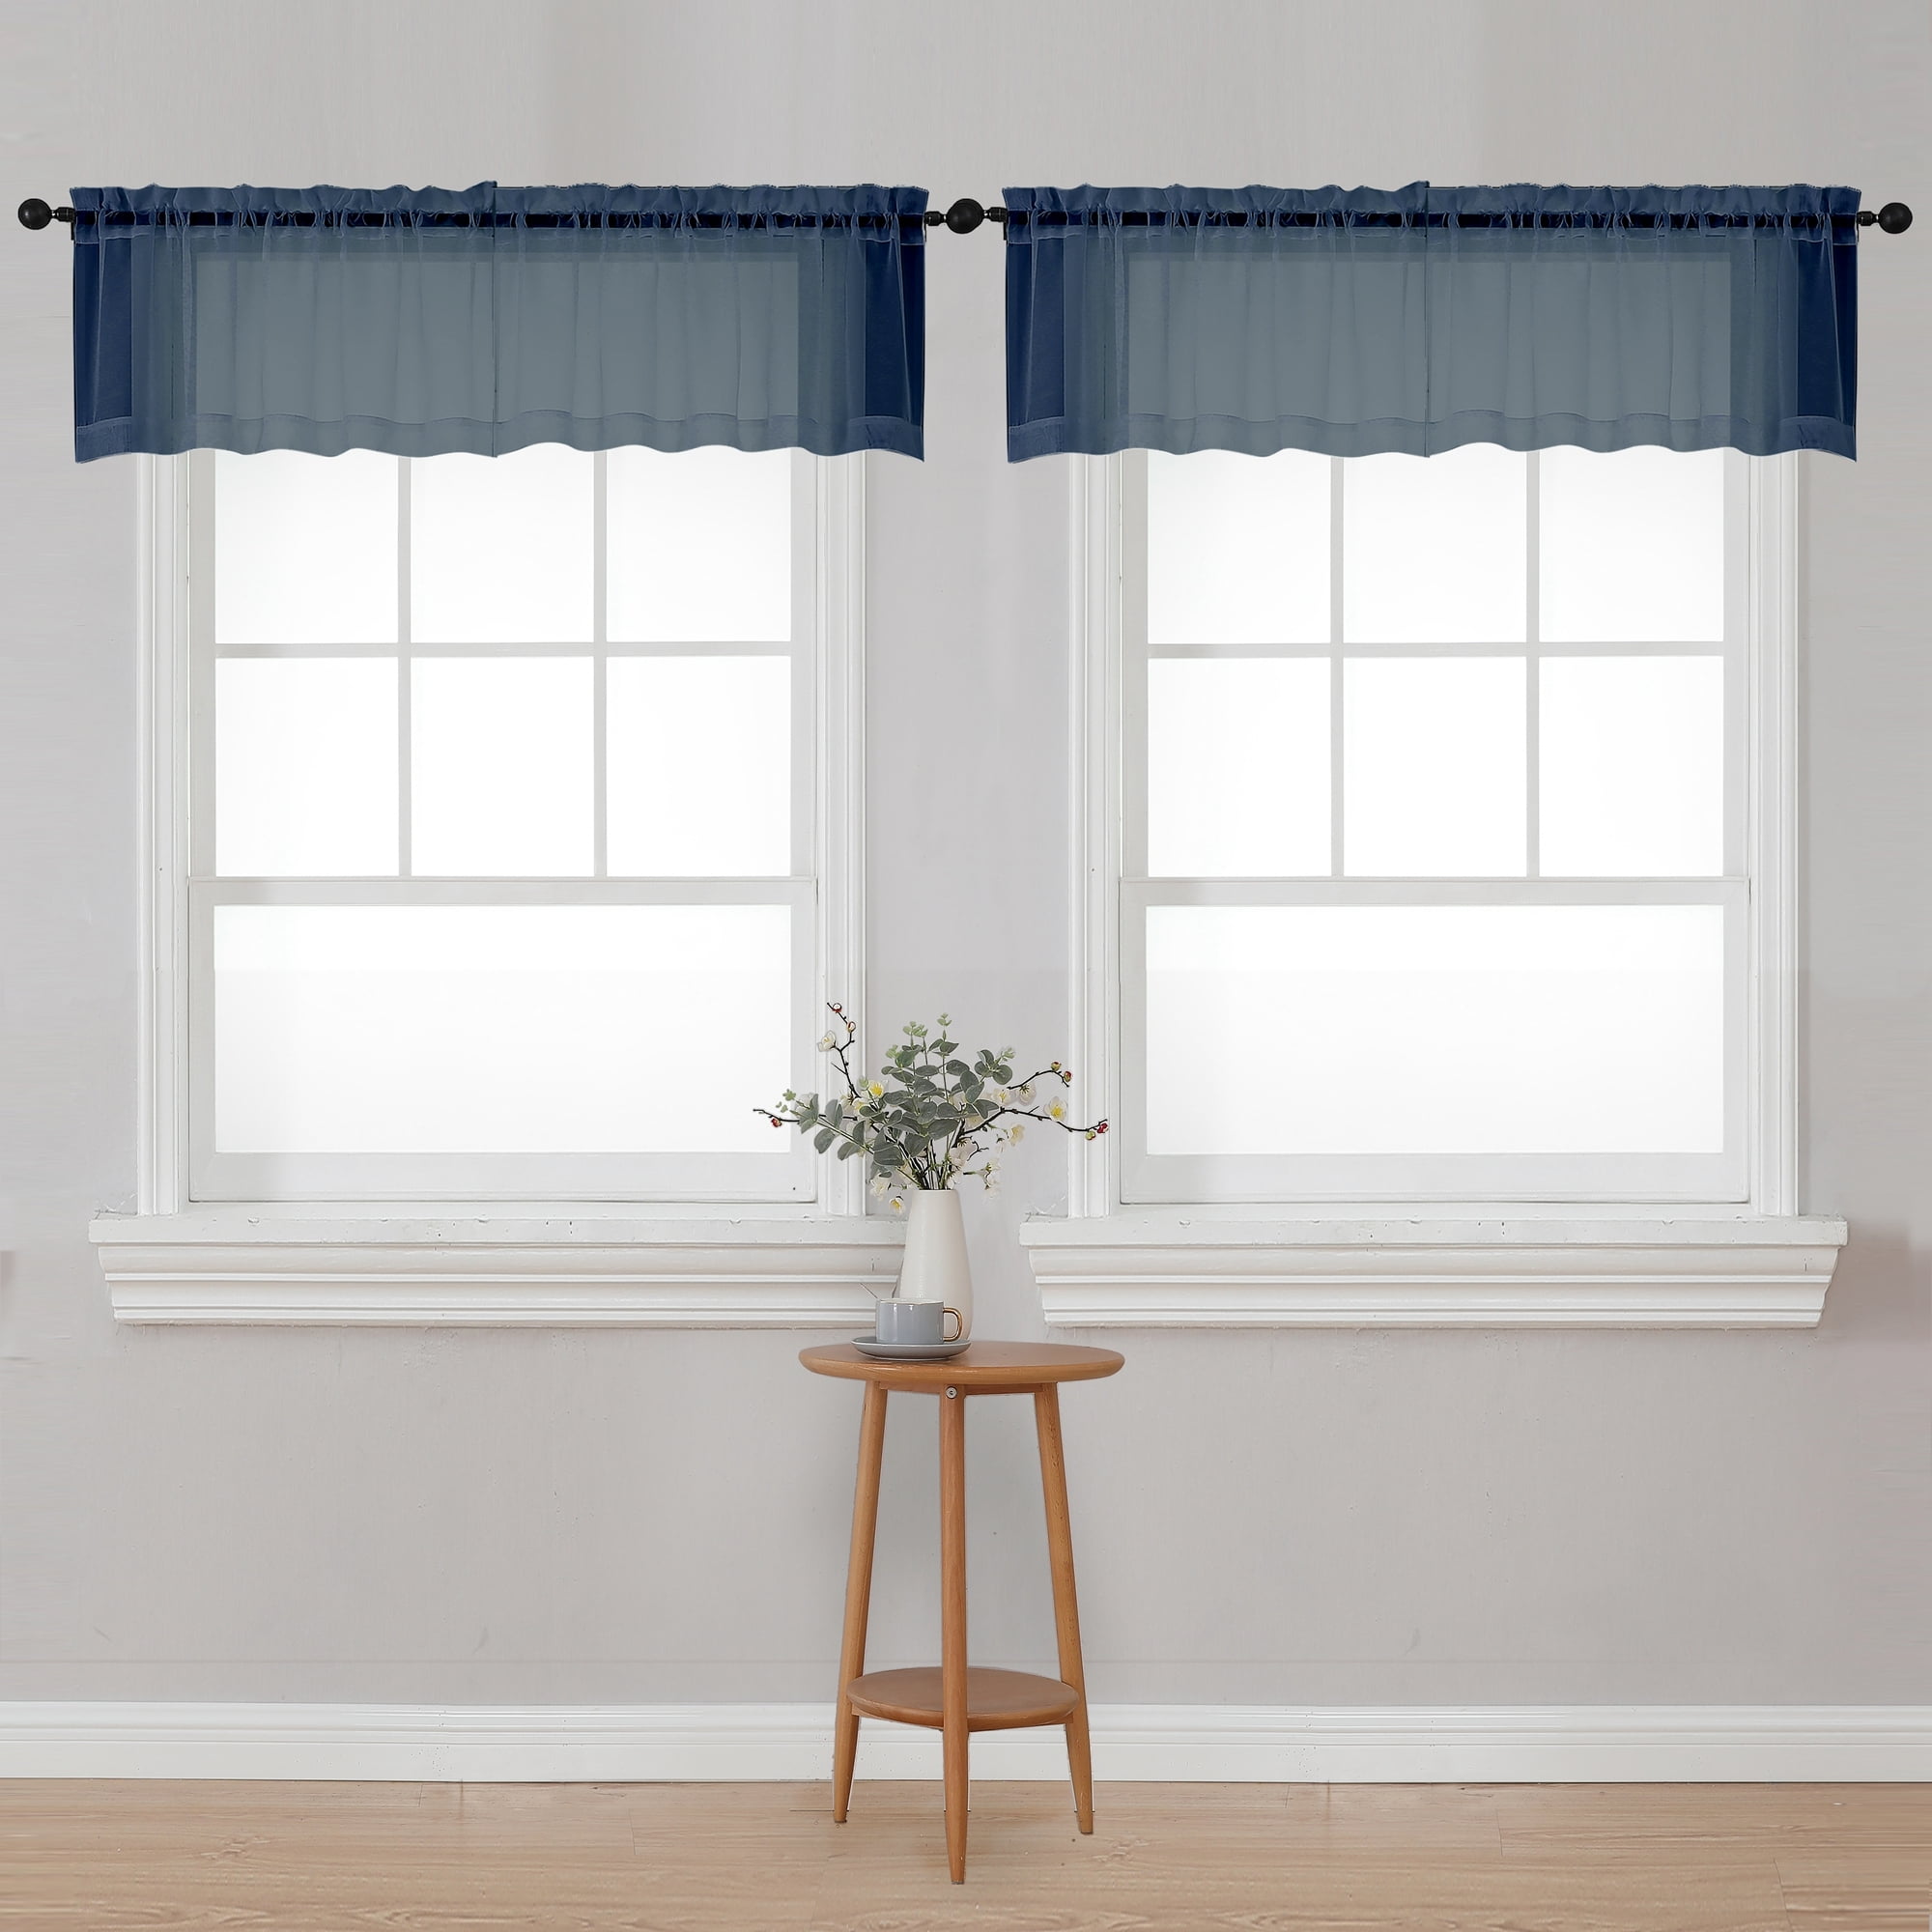 Ovzme Sheer Valance Curtains Set Of 4